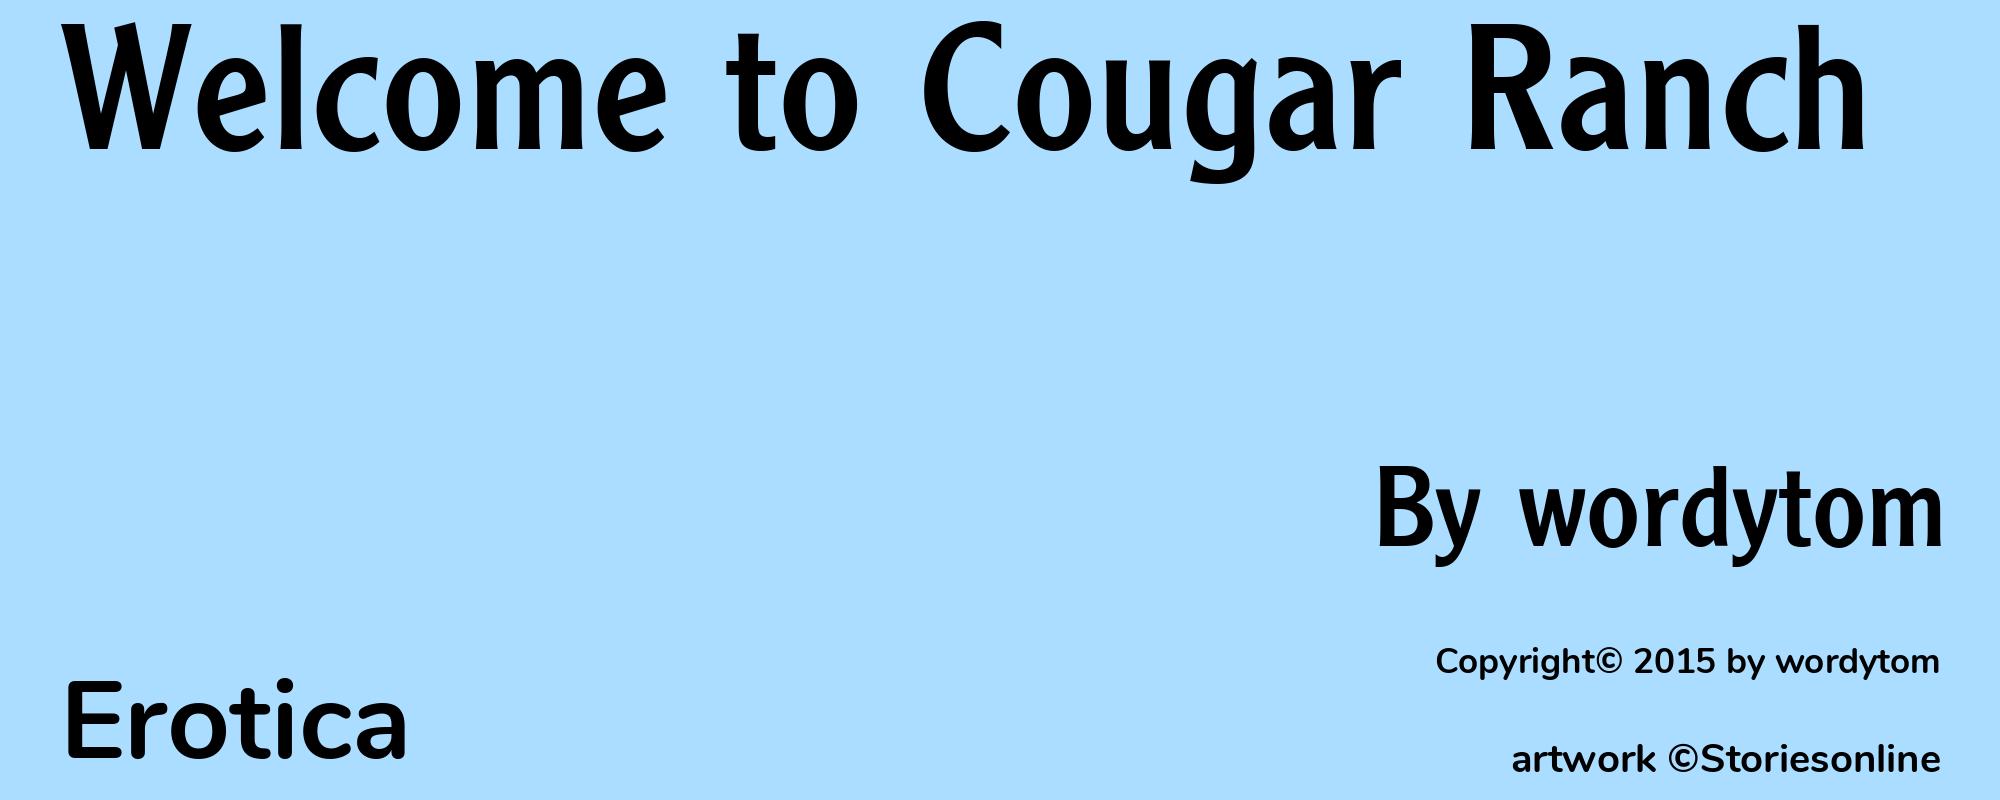 Welcome to Cougar Ranch - Cover